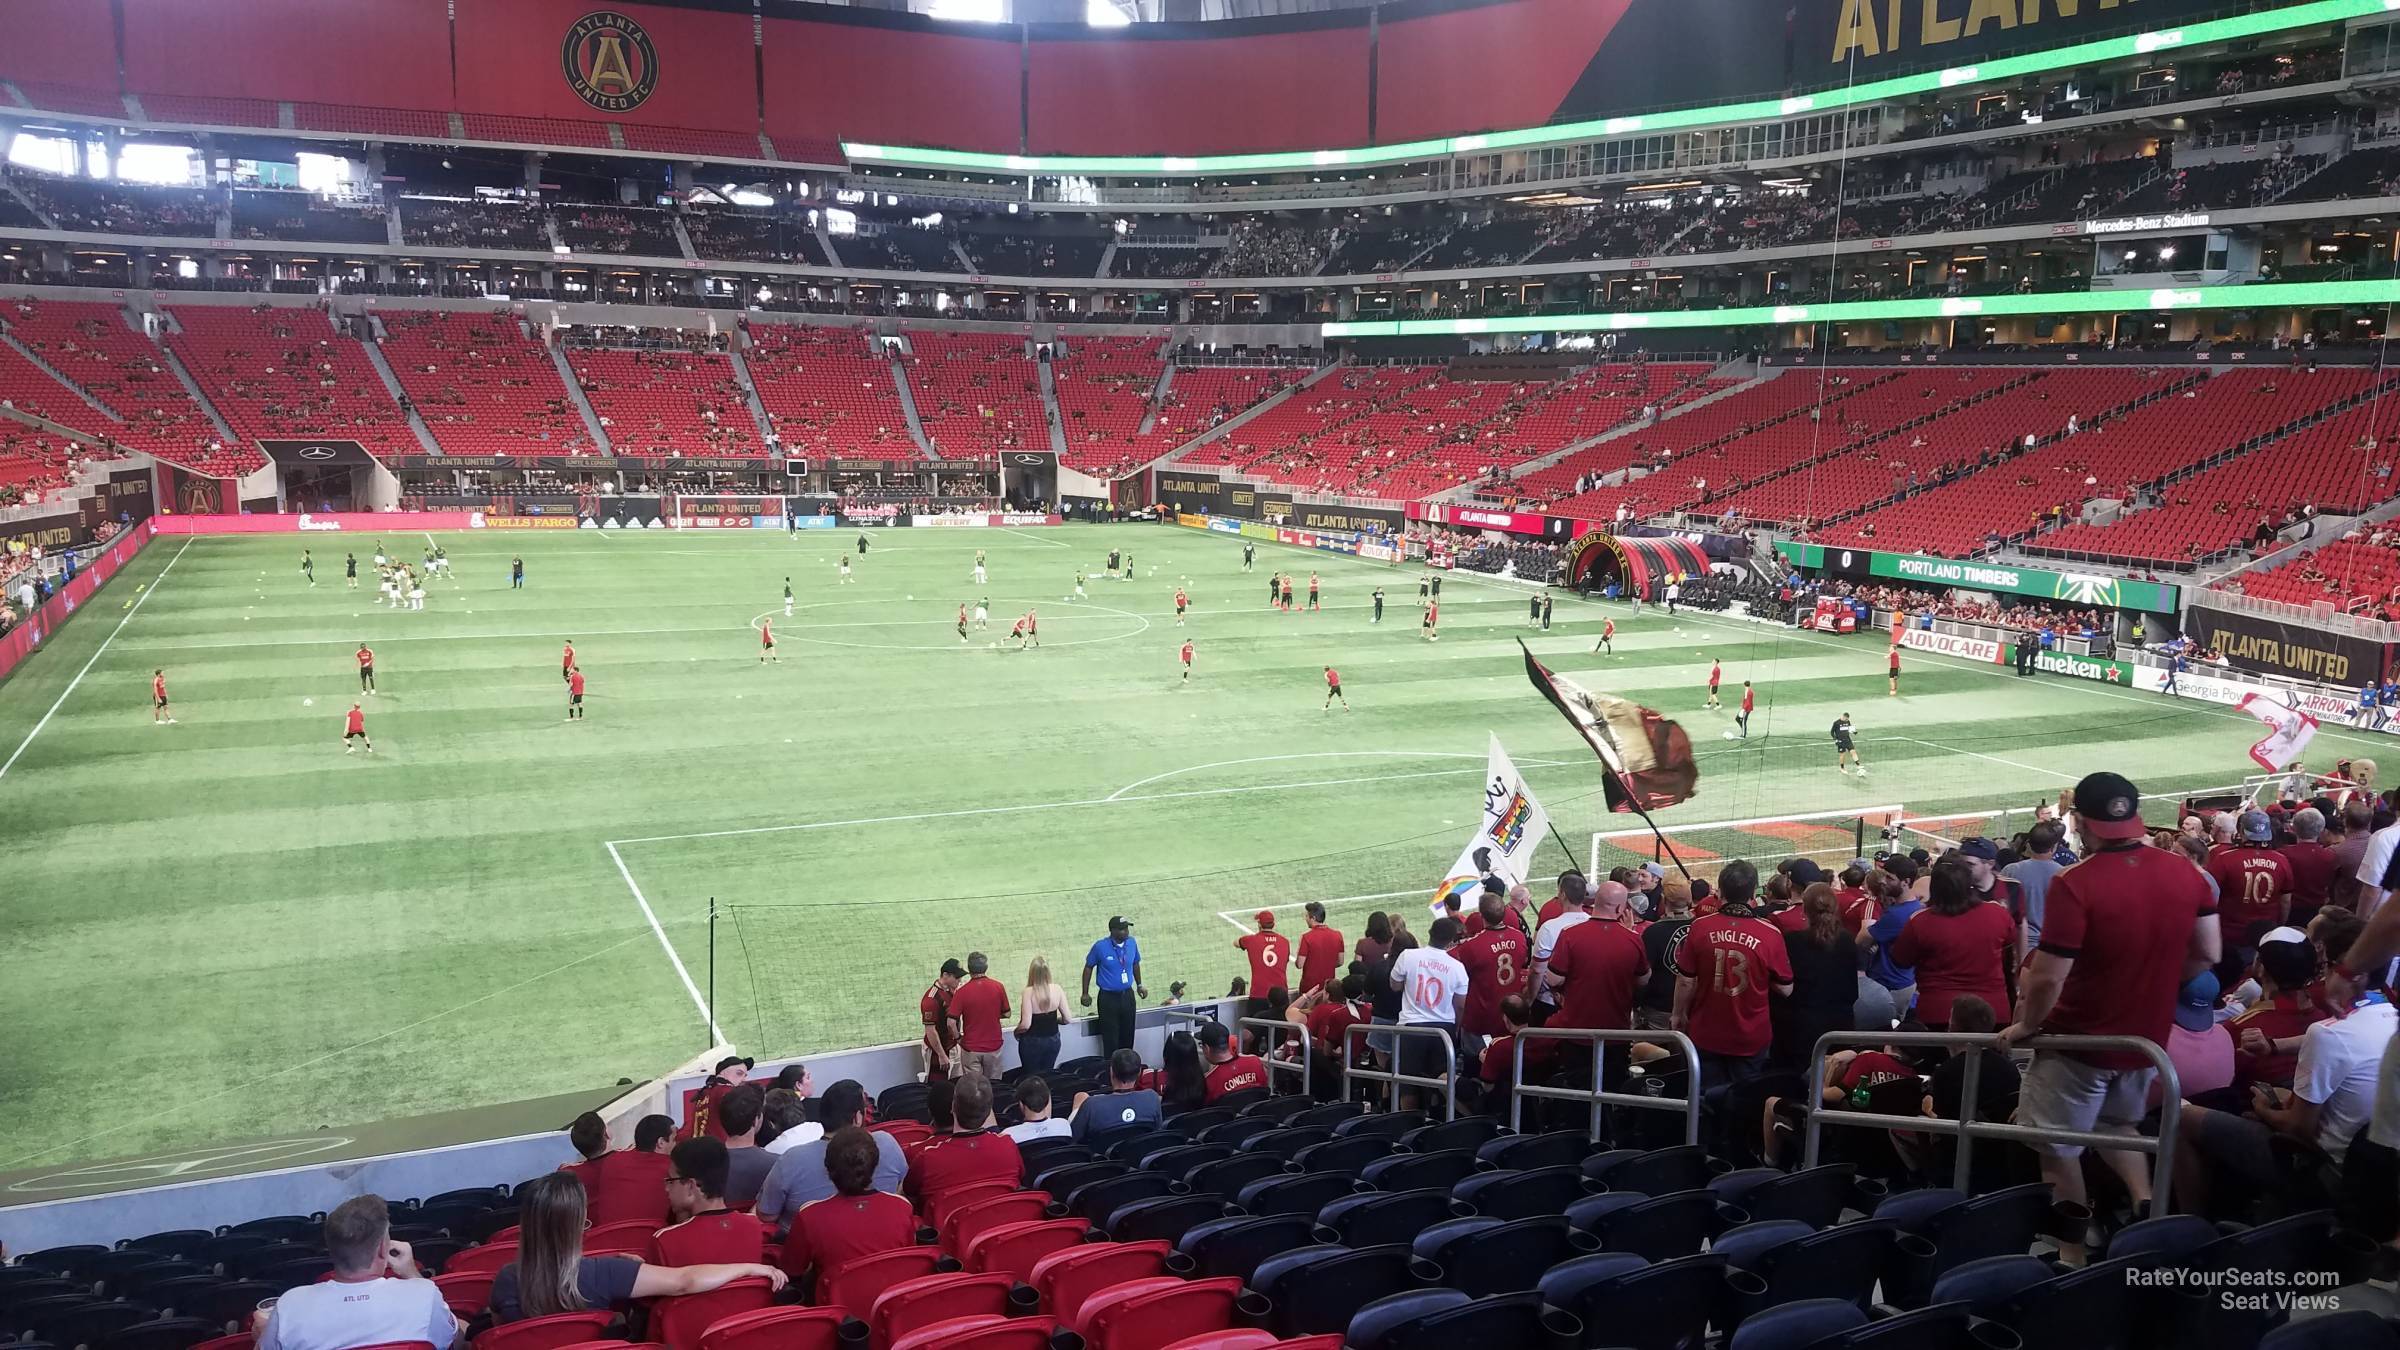 section 103, row 30 seat view  for soccer - mercedes-benz stadium